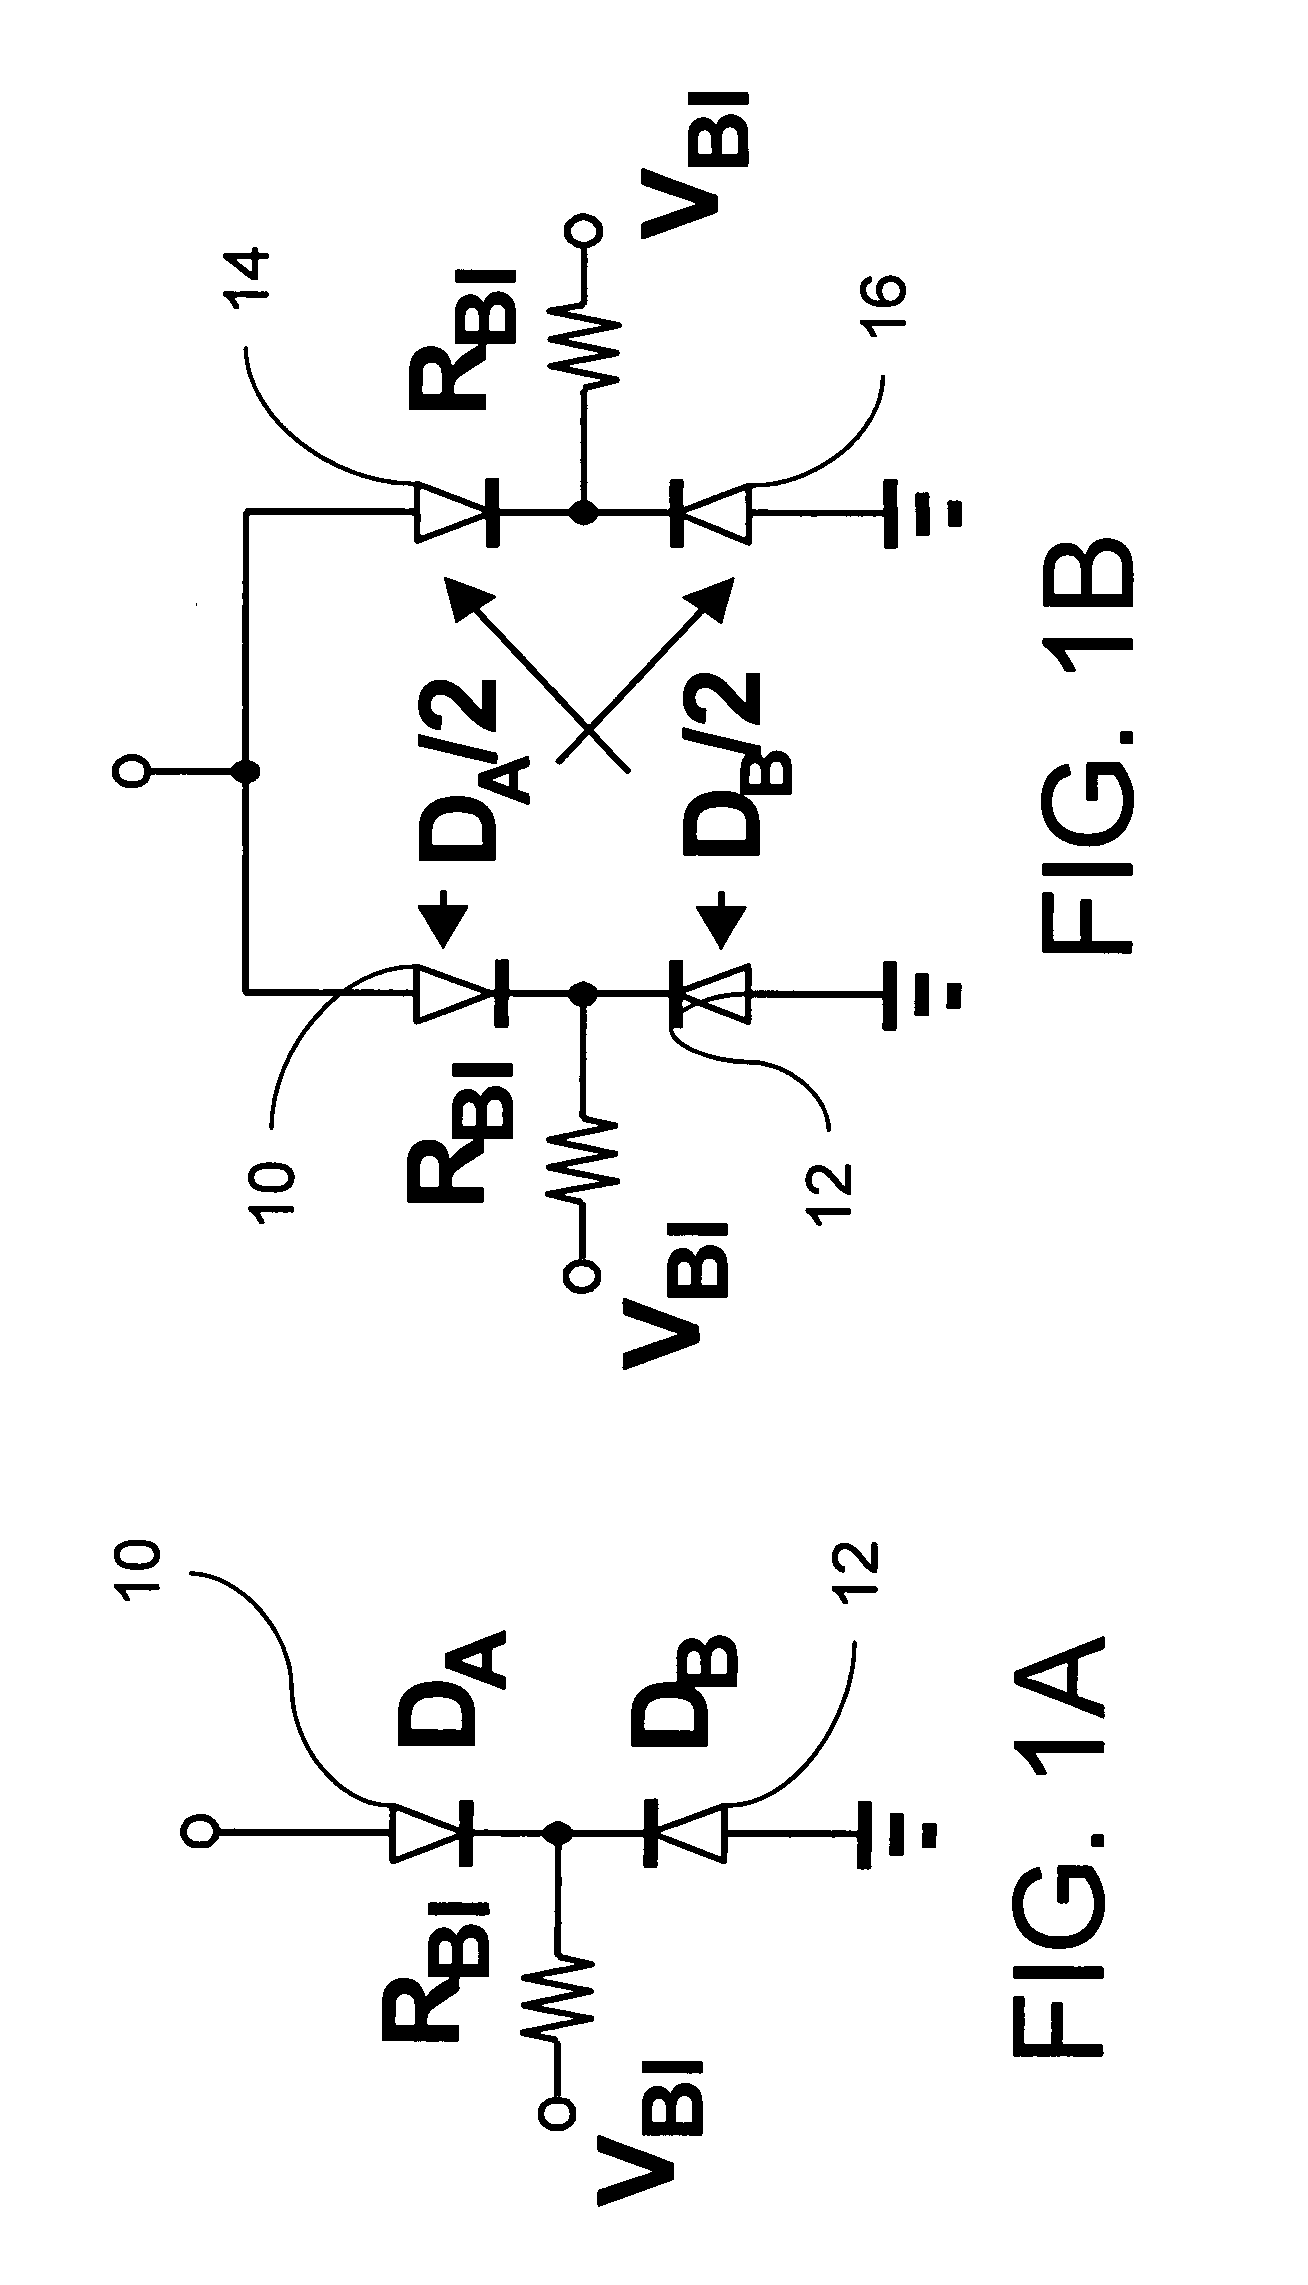 Linear variable voltage diode capacitor and adaptive matching networks